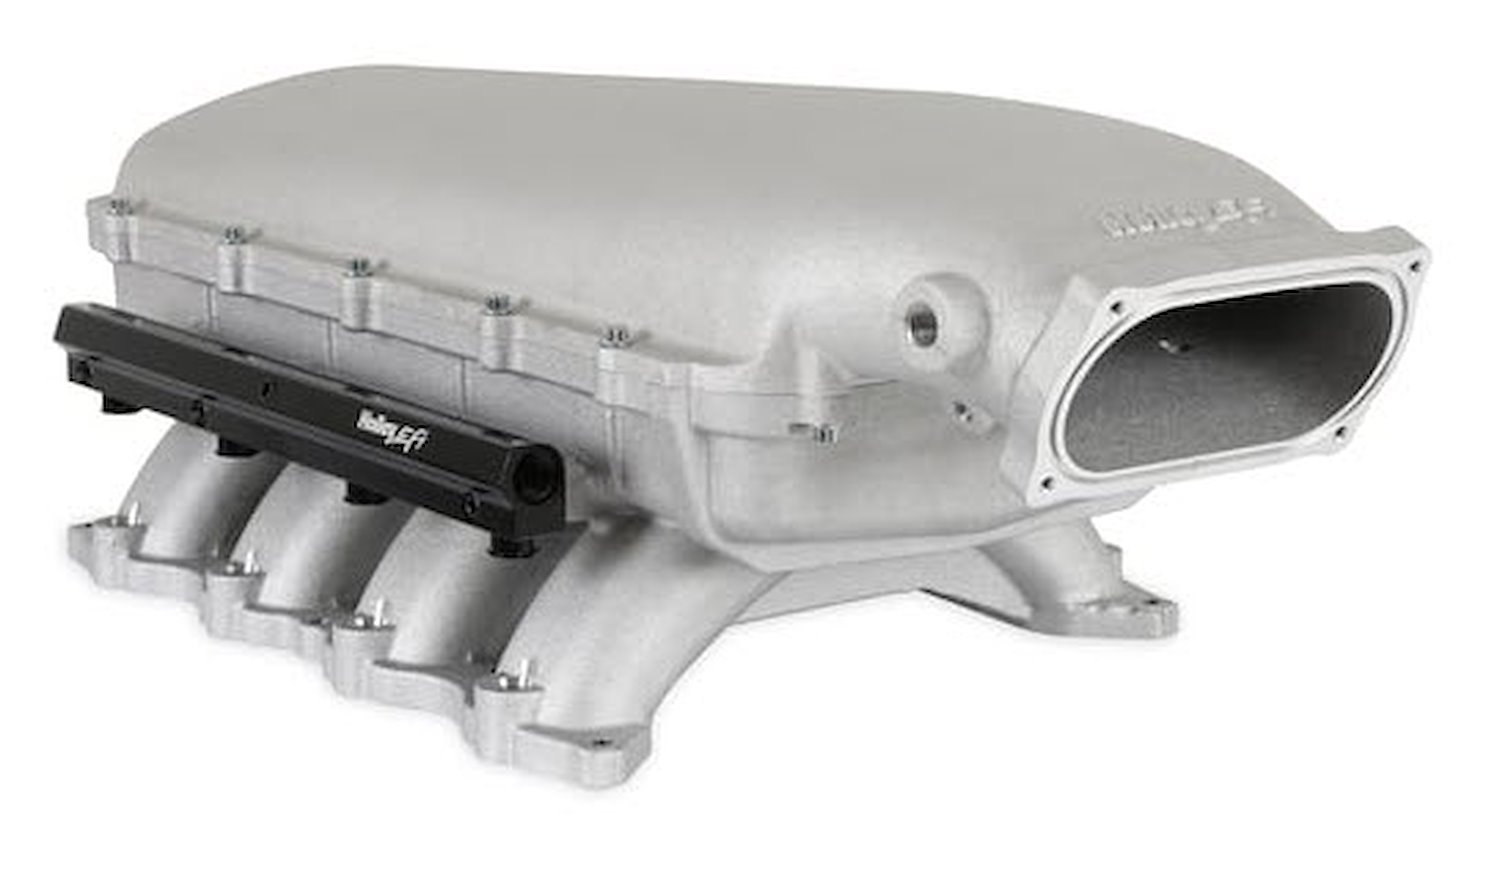 300-910 Hi-Ram Modular Intake Manifold for Ford Coyote Engines w/150mm x 66mm Single Oval Throttle Body (Natural)